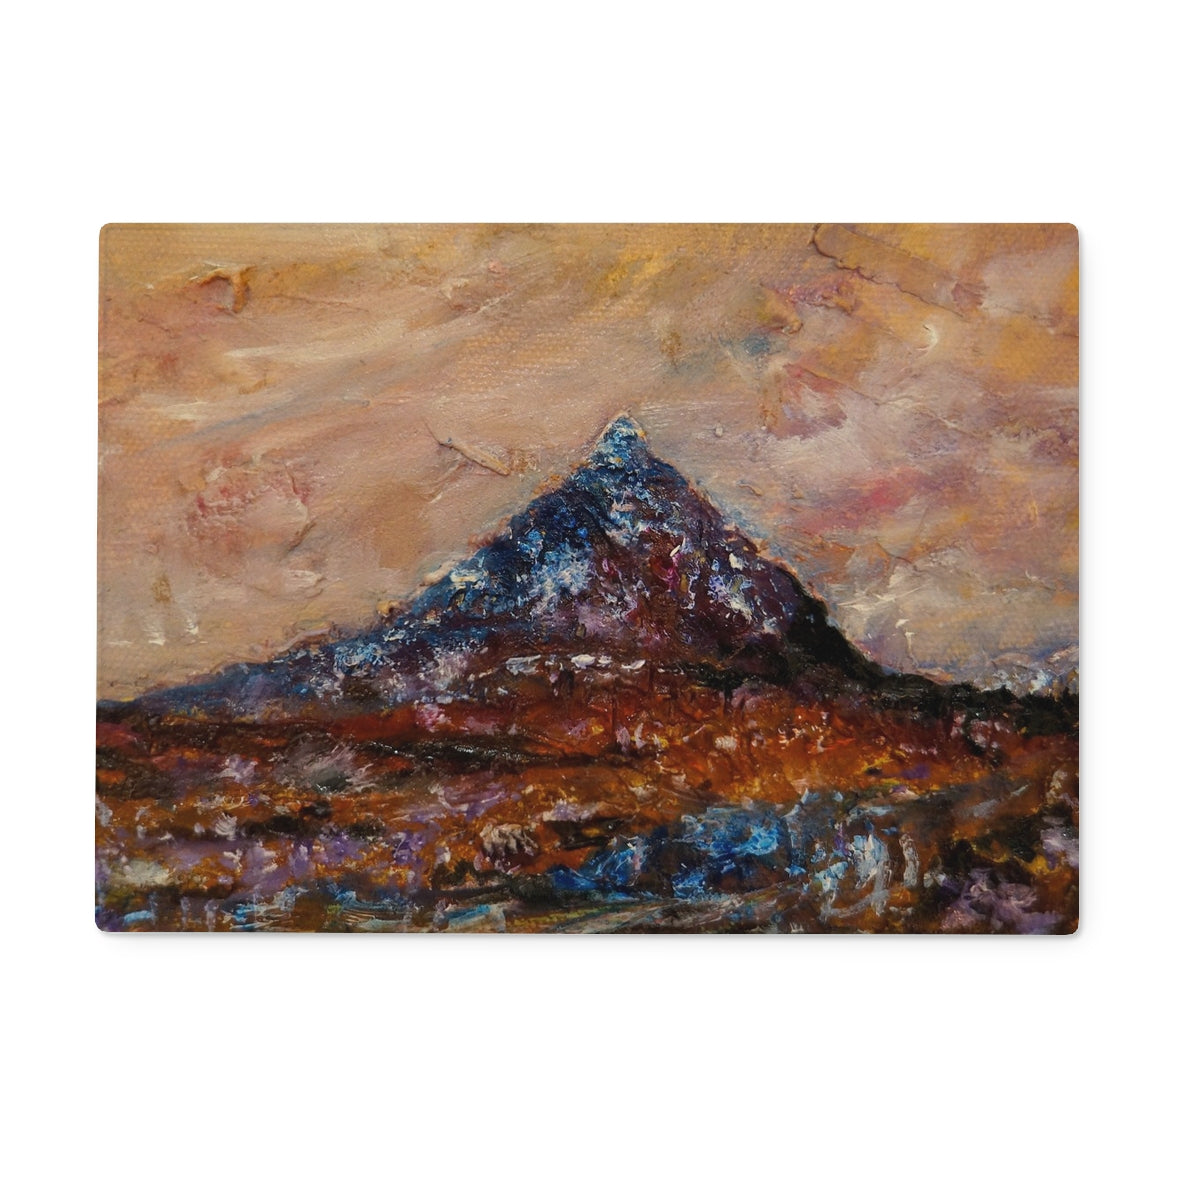 Buachaille Etive Mòr Art Gifts Glass Chopping Board-Glass Chopping Boards-Glencoe Art Gallery-15"x11" Rectangular-Paintings, Prints, Homeware, Art Gifts From Scotland By Scottish Artist Kevin Hunter